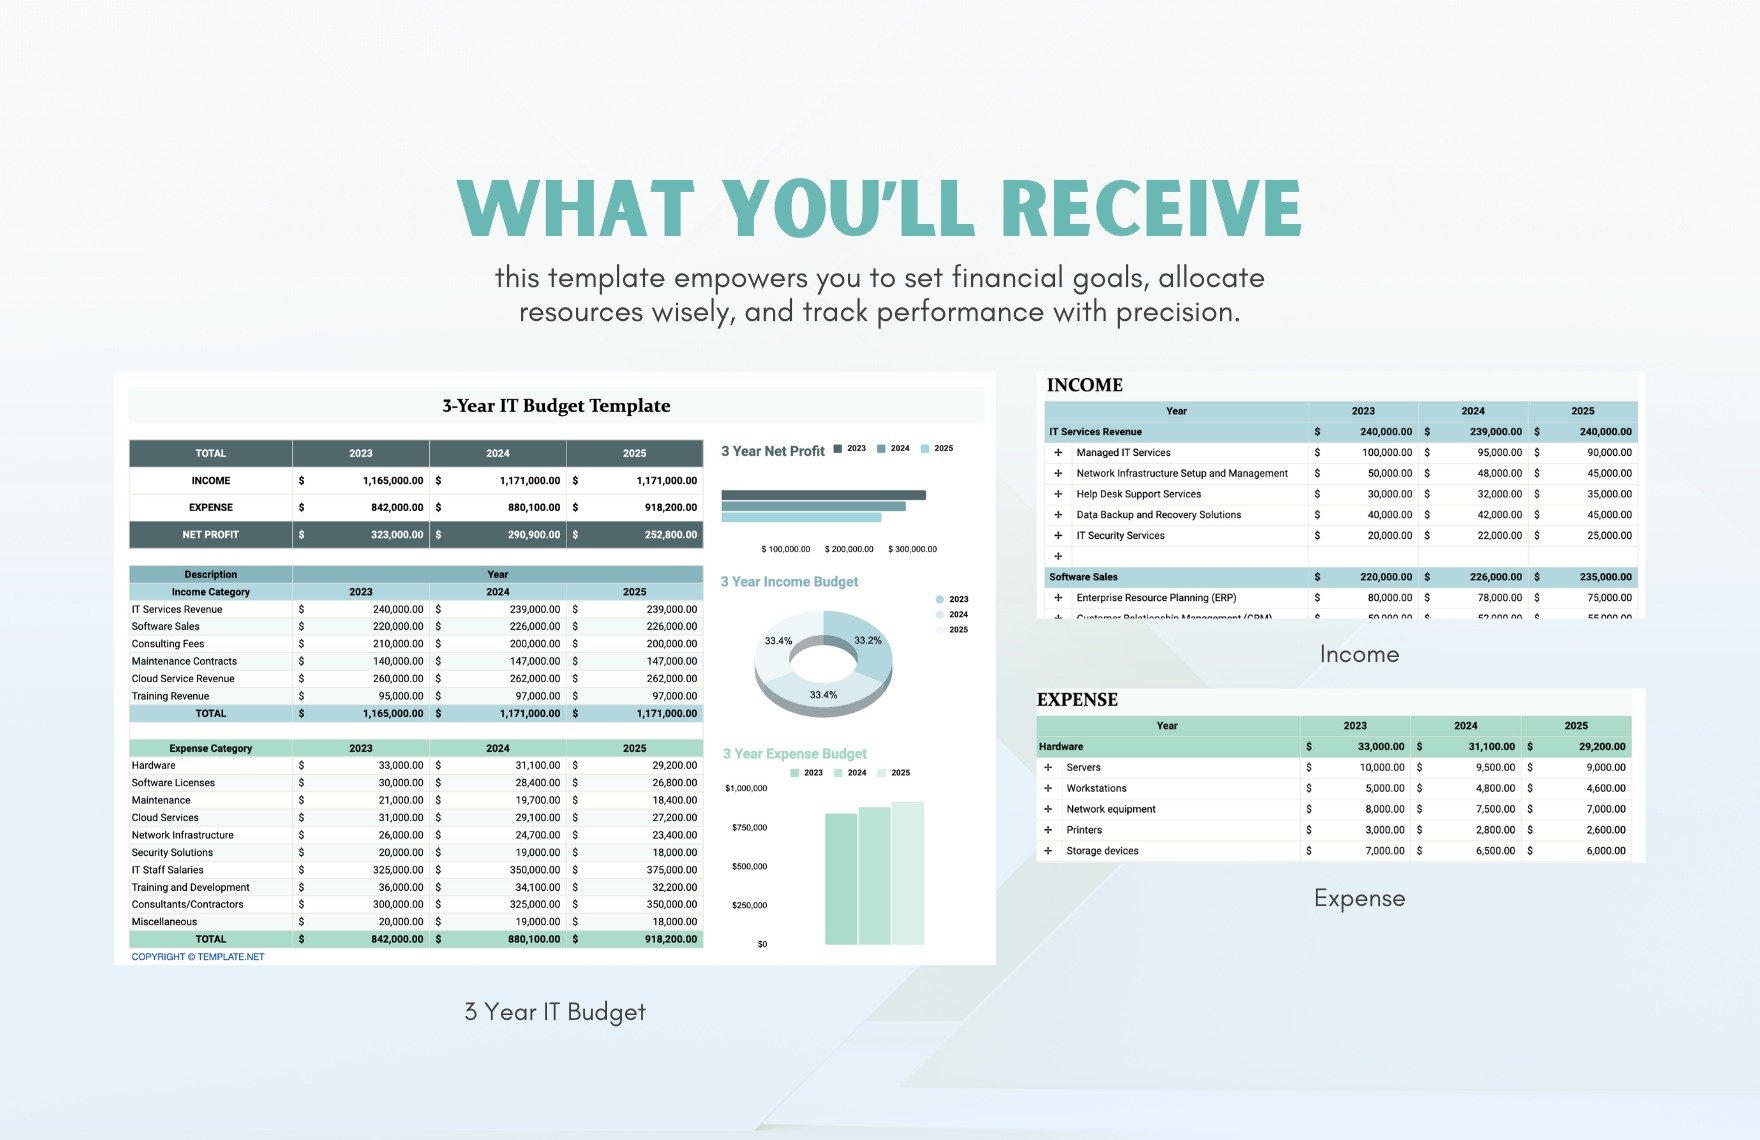 3-Year IT Budget Template